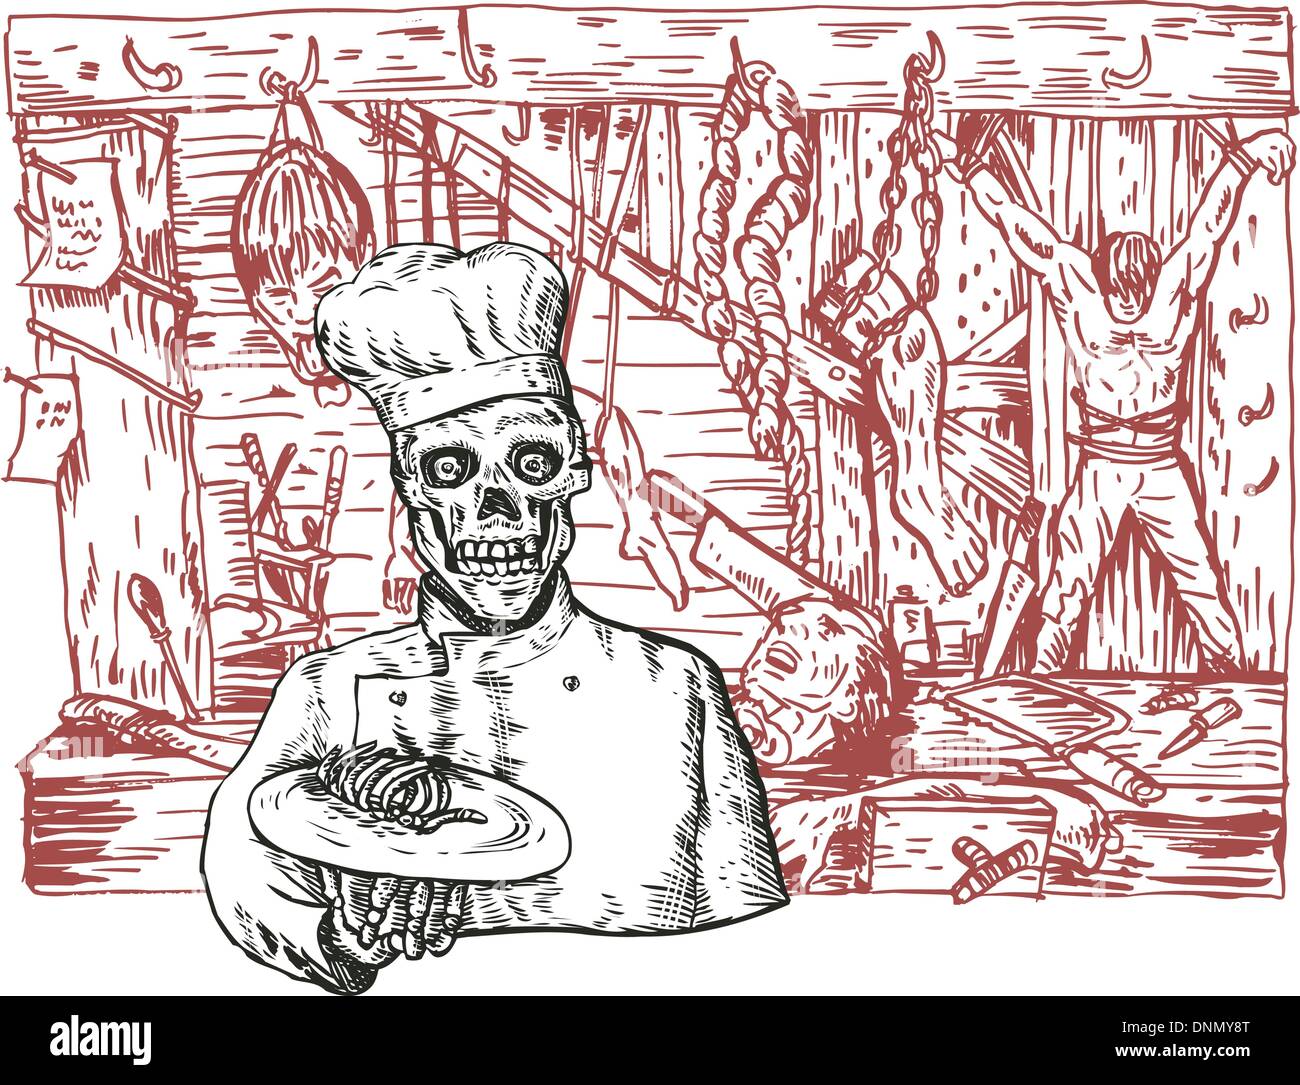 Illustration of dungeon room chef baker done in retro style. Stock Vector